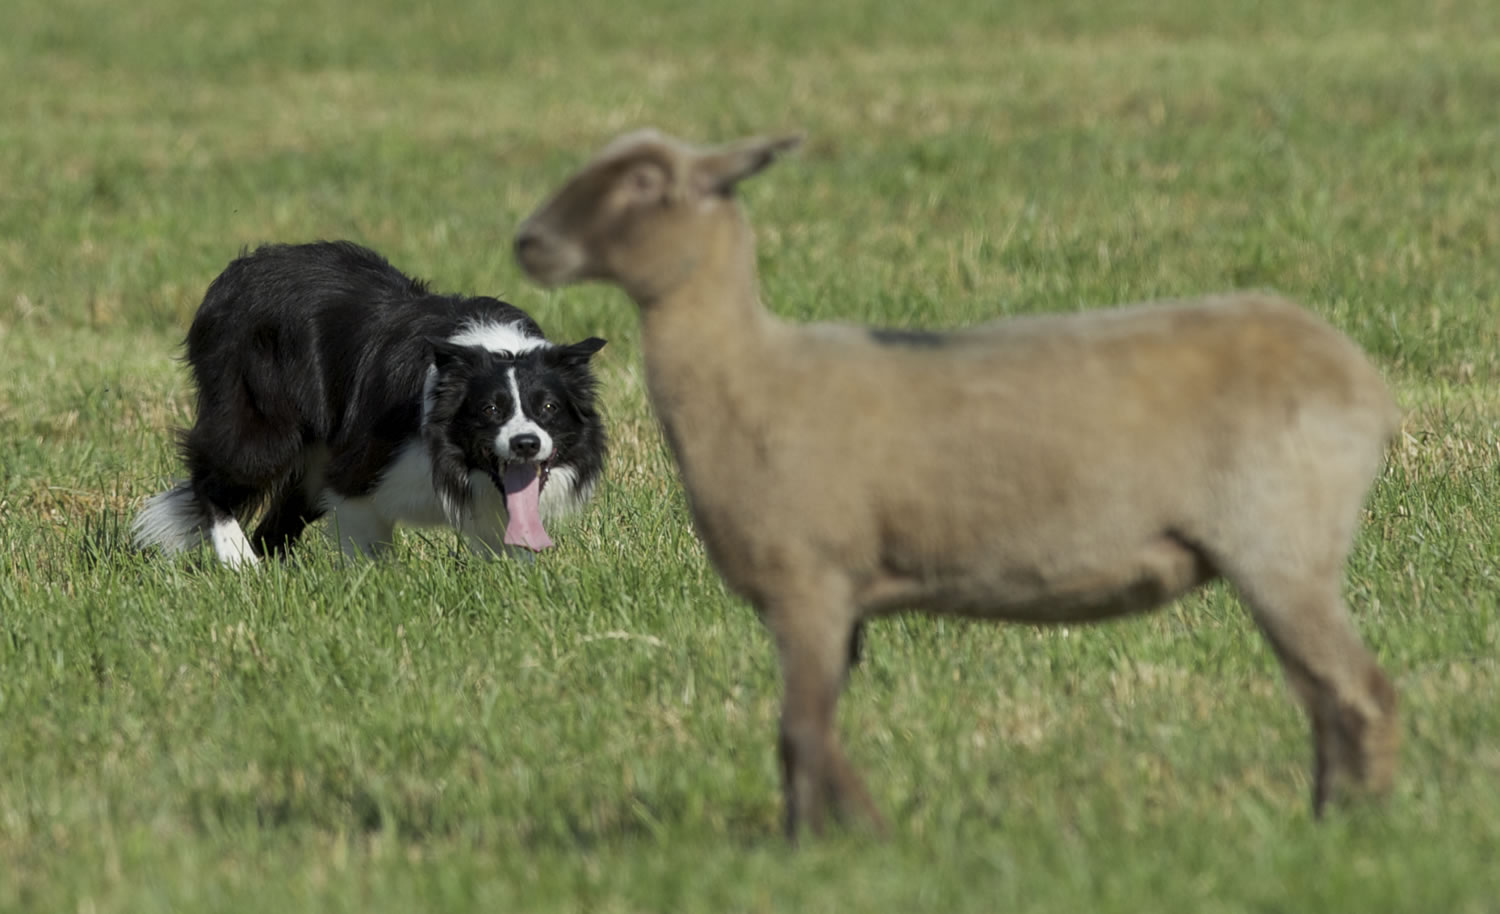 Scoop, handled by Bryan White, drives a lamb during the Lacamas Valley Sheep Dog Trial outside Camas on Saturday.